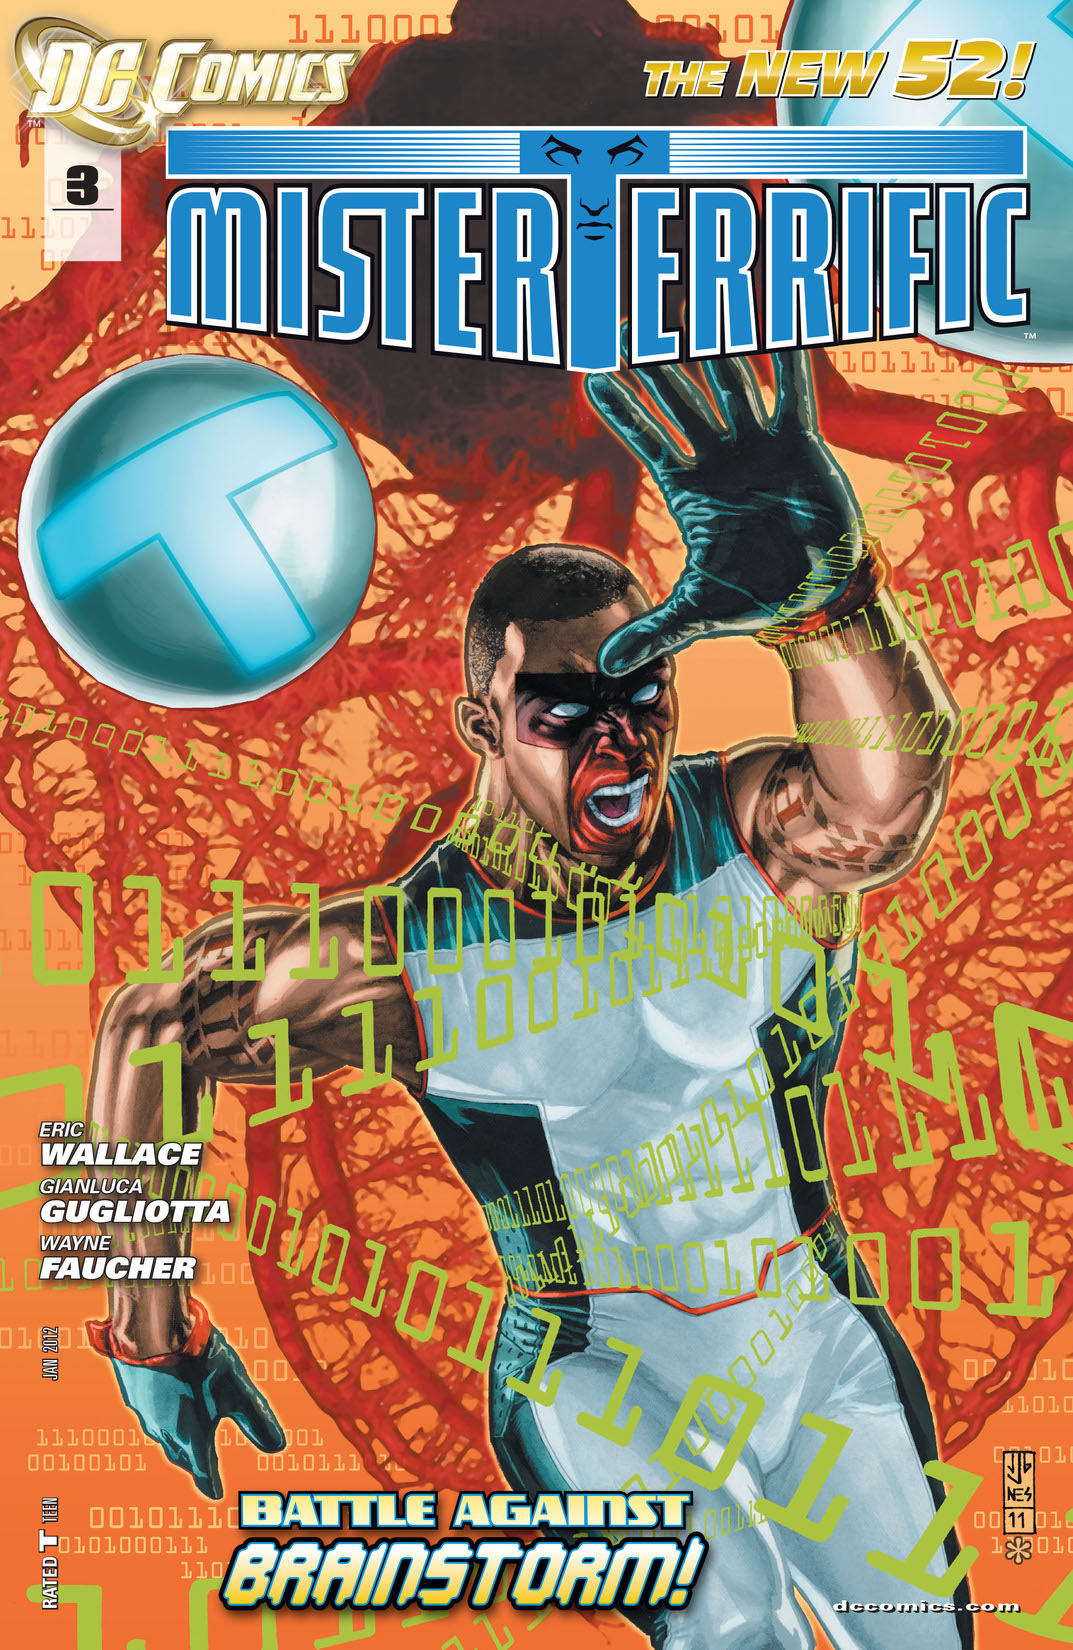 Mister Terrific #3 preview images